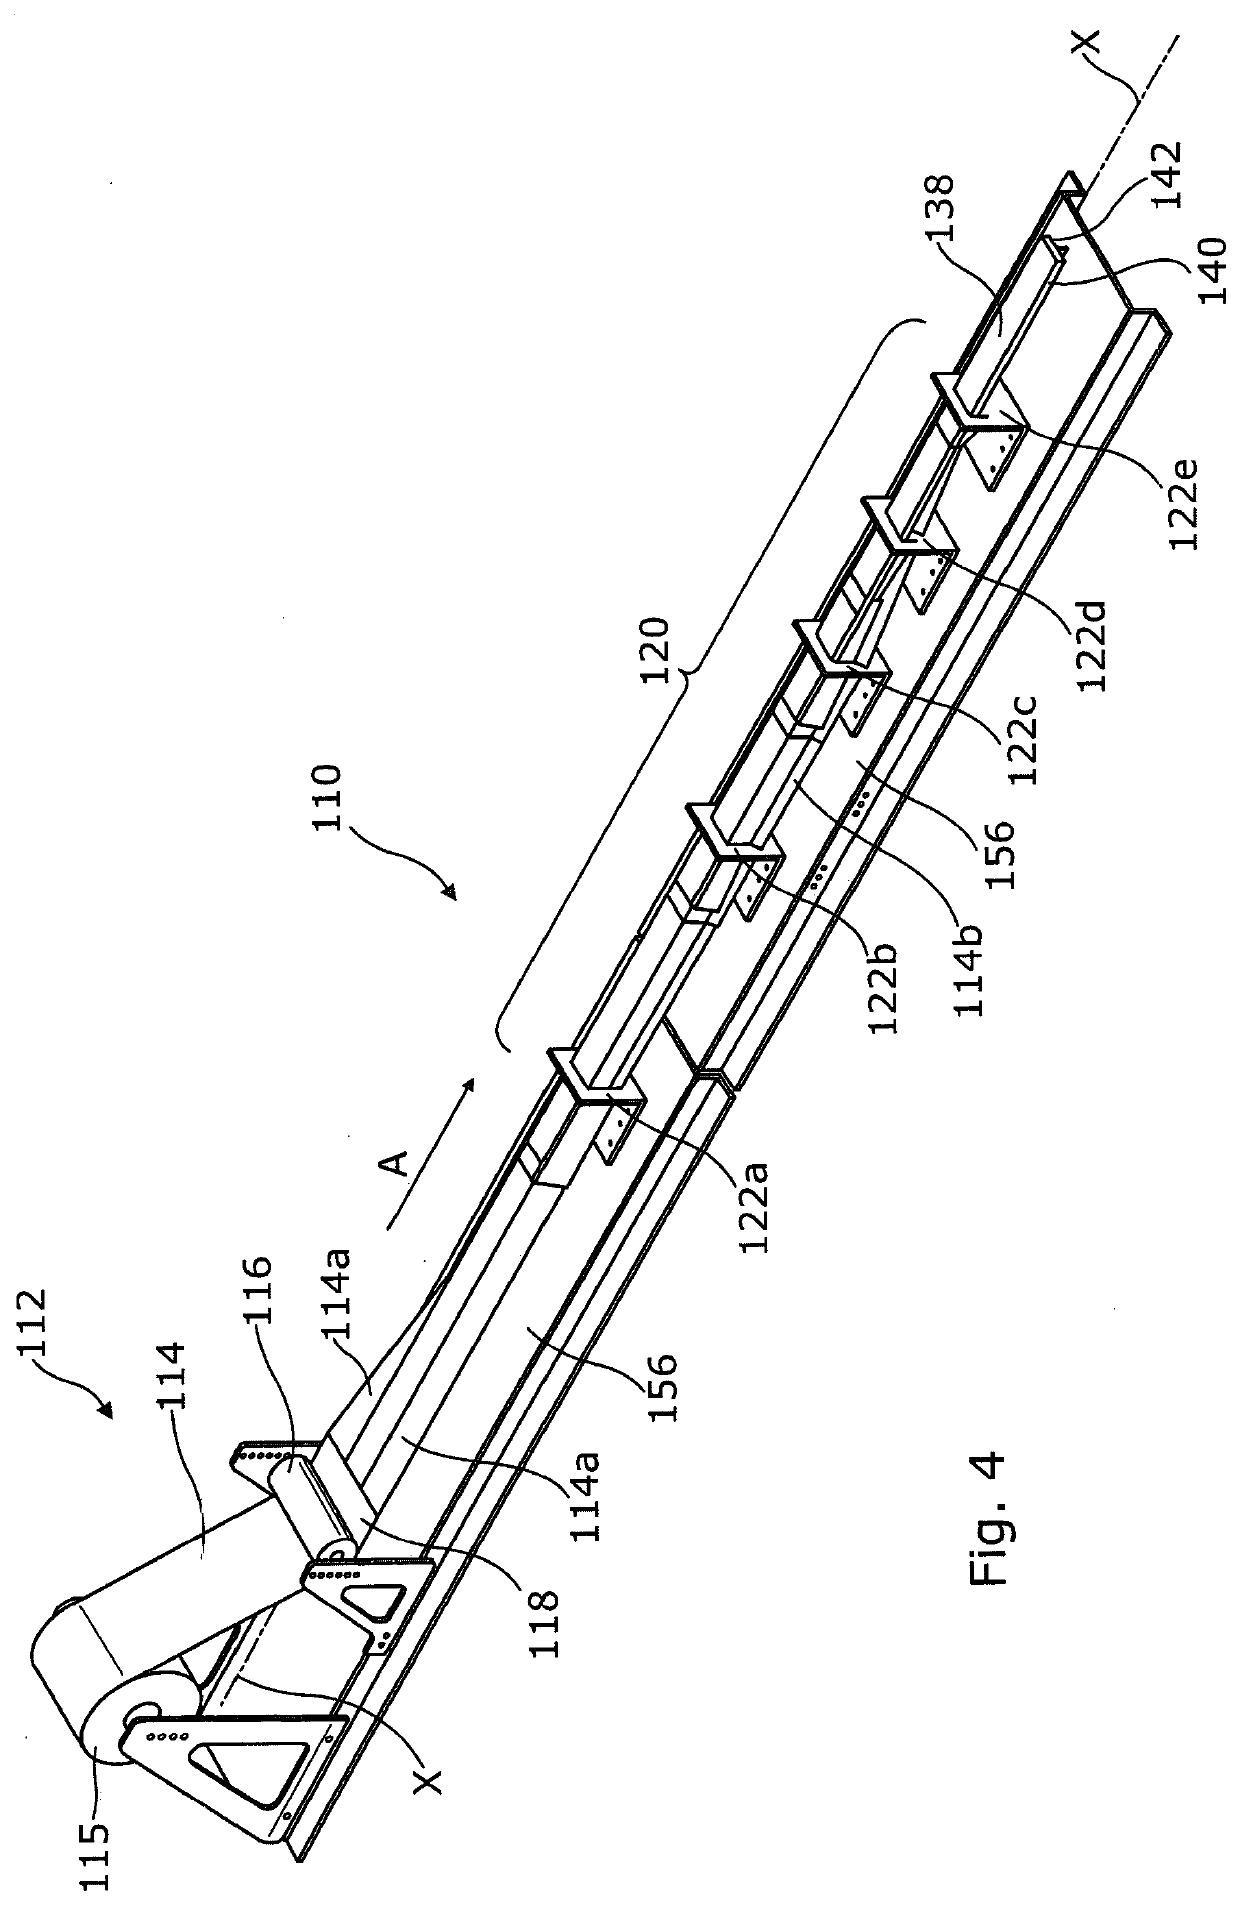 Apparatus and methods for producing tubular packages